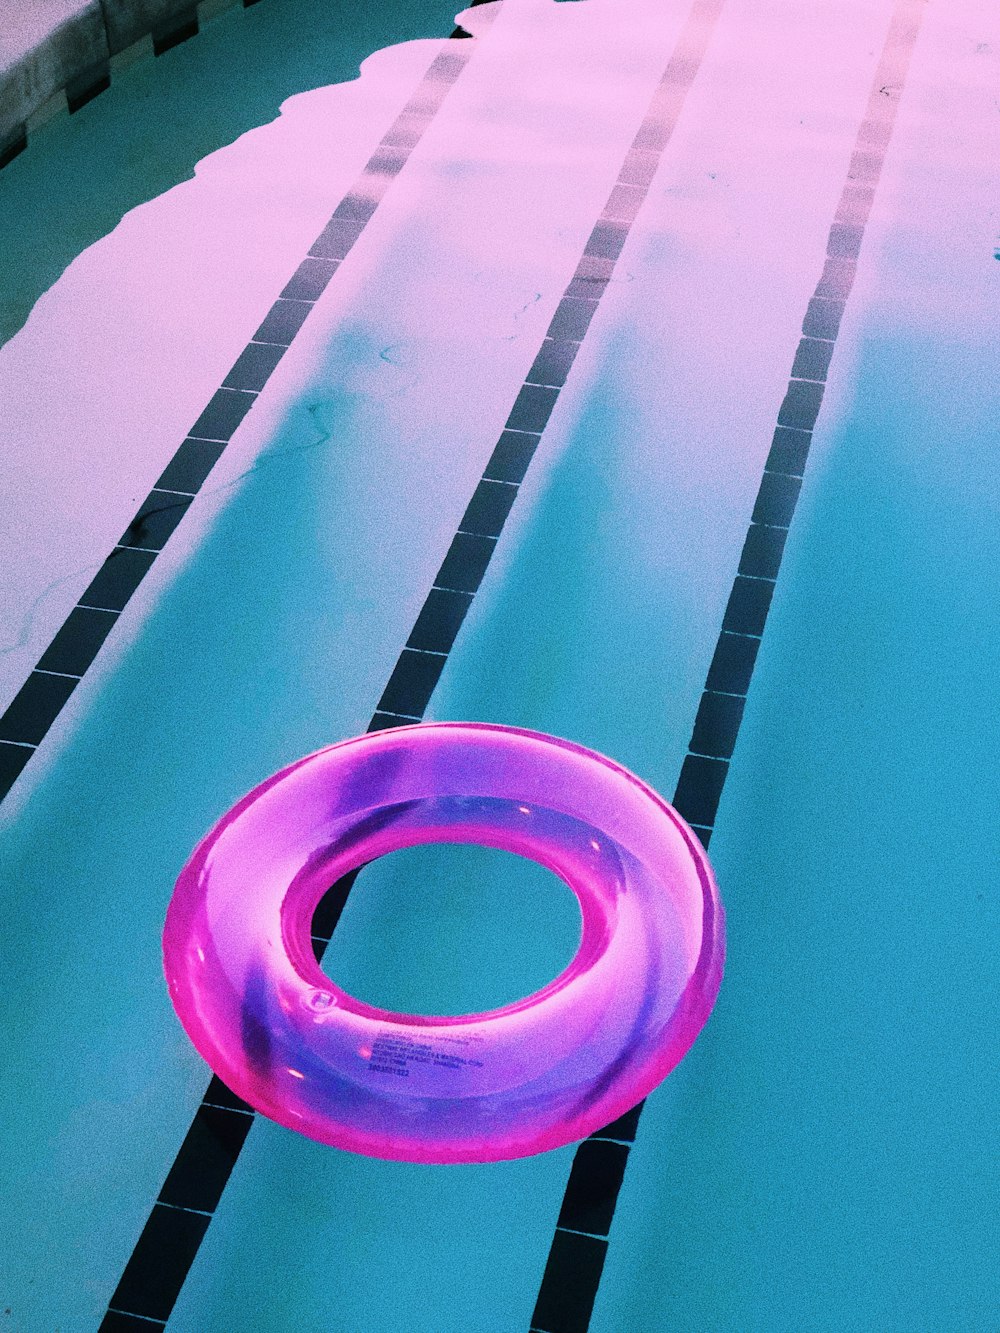 pink inflatable ring on pool